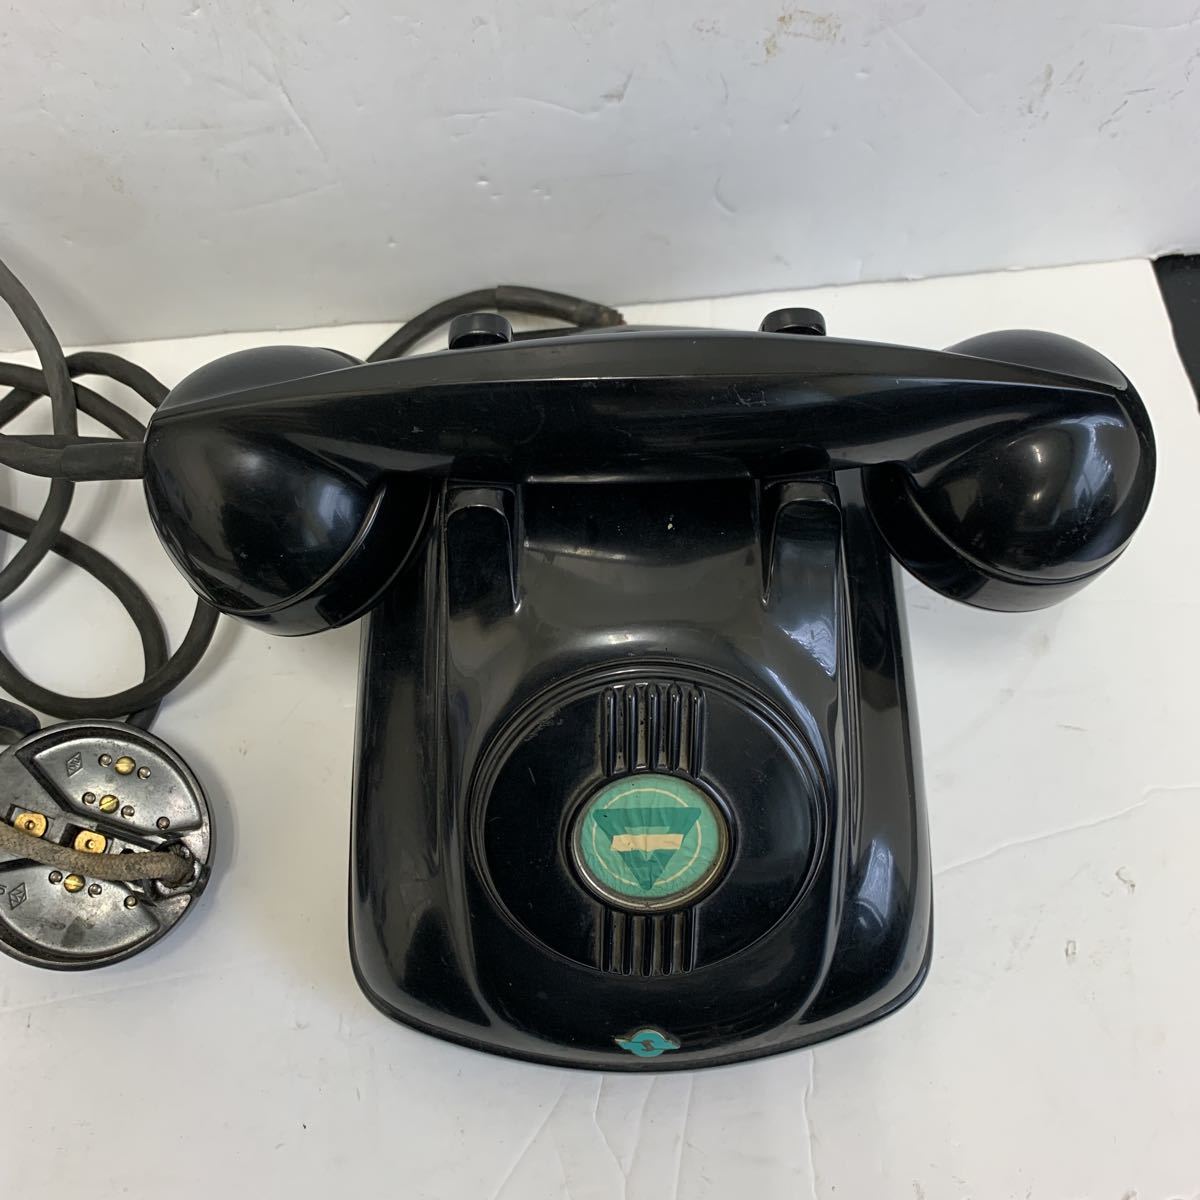  black telephone 4 number C also electro- type valuable telephone machine antique Showa Retro that time thing 